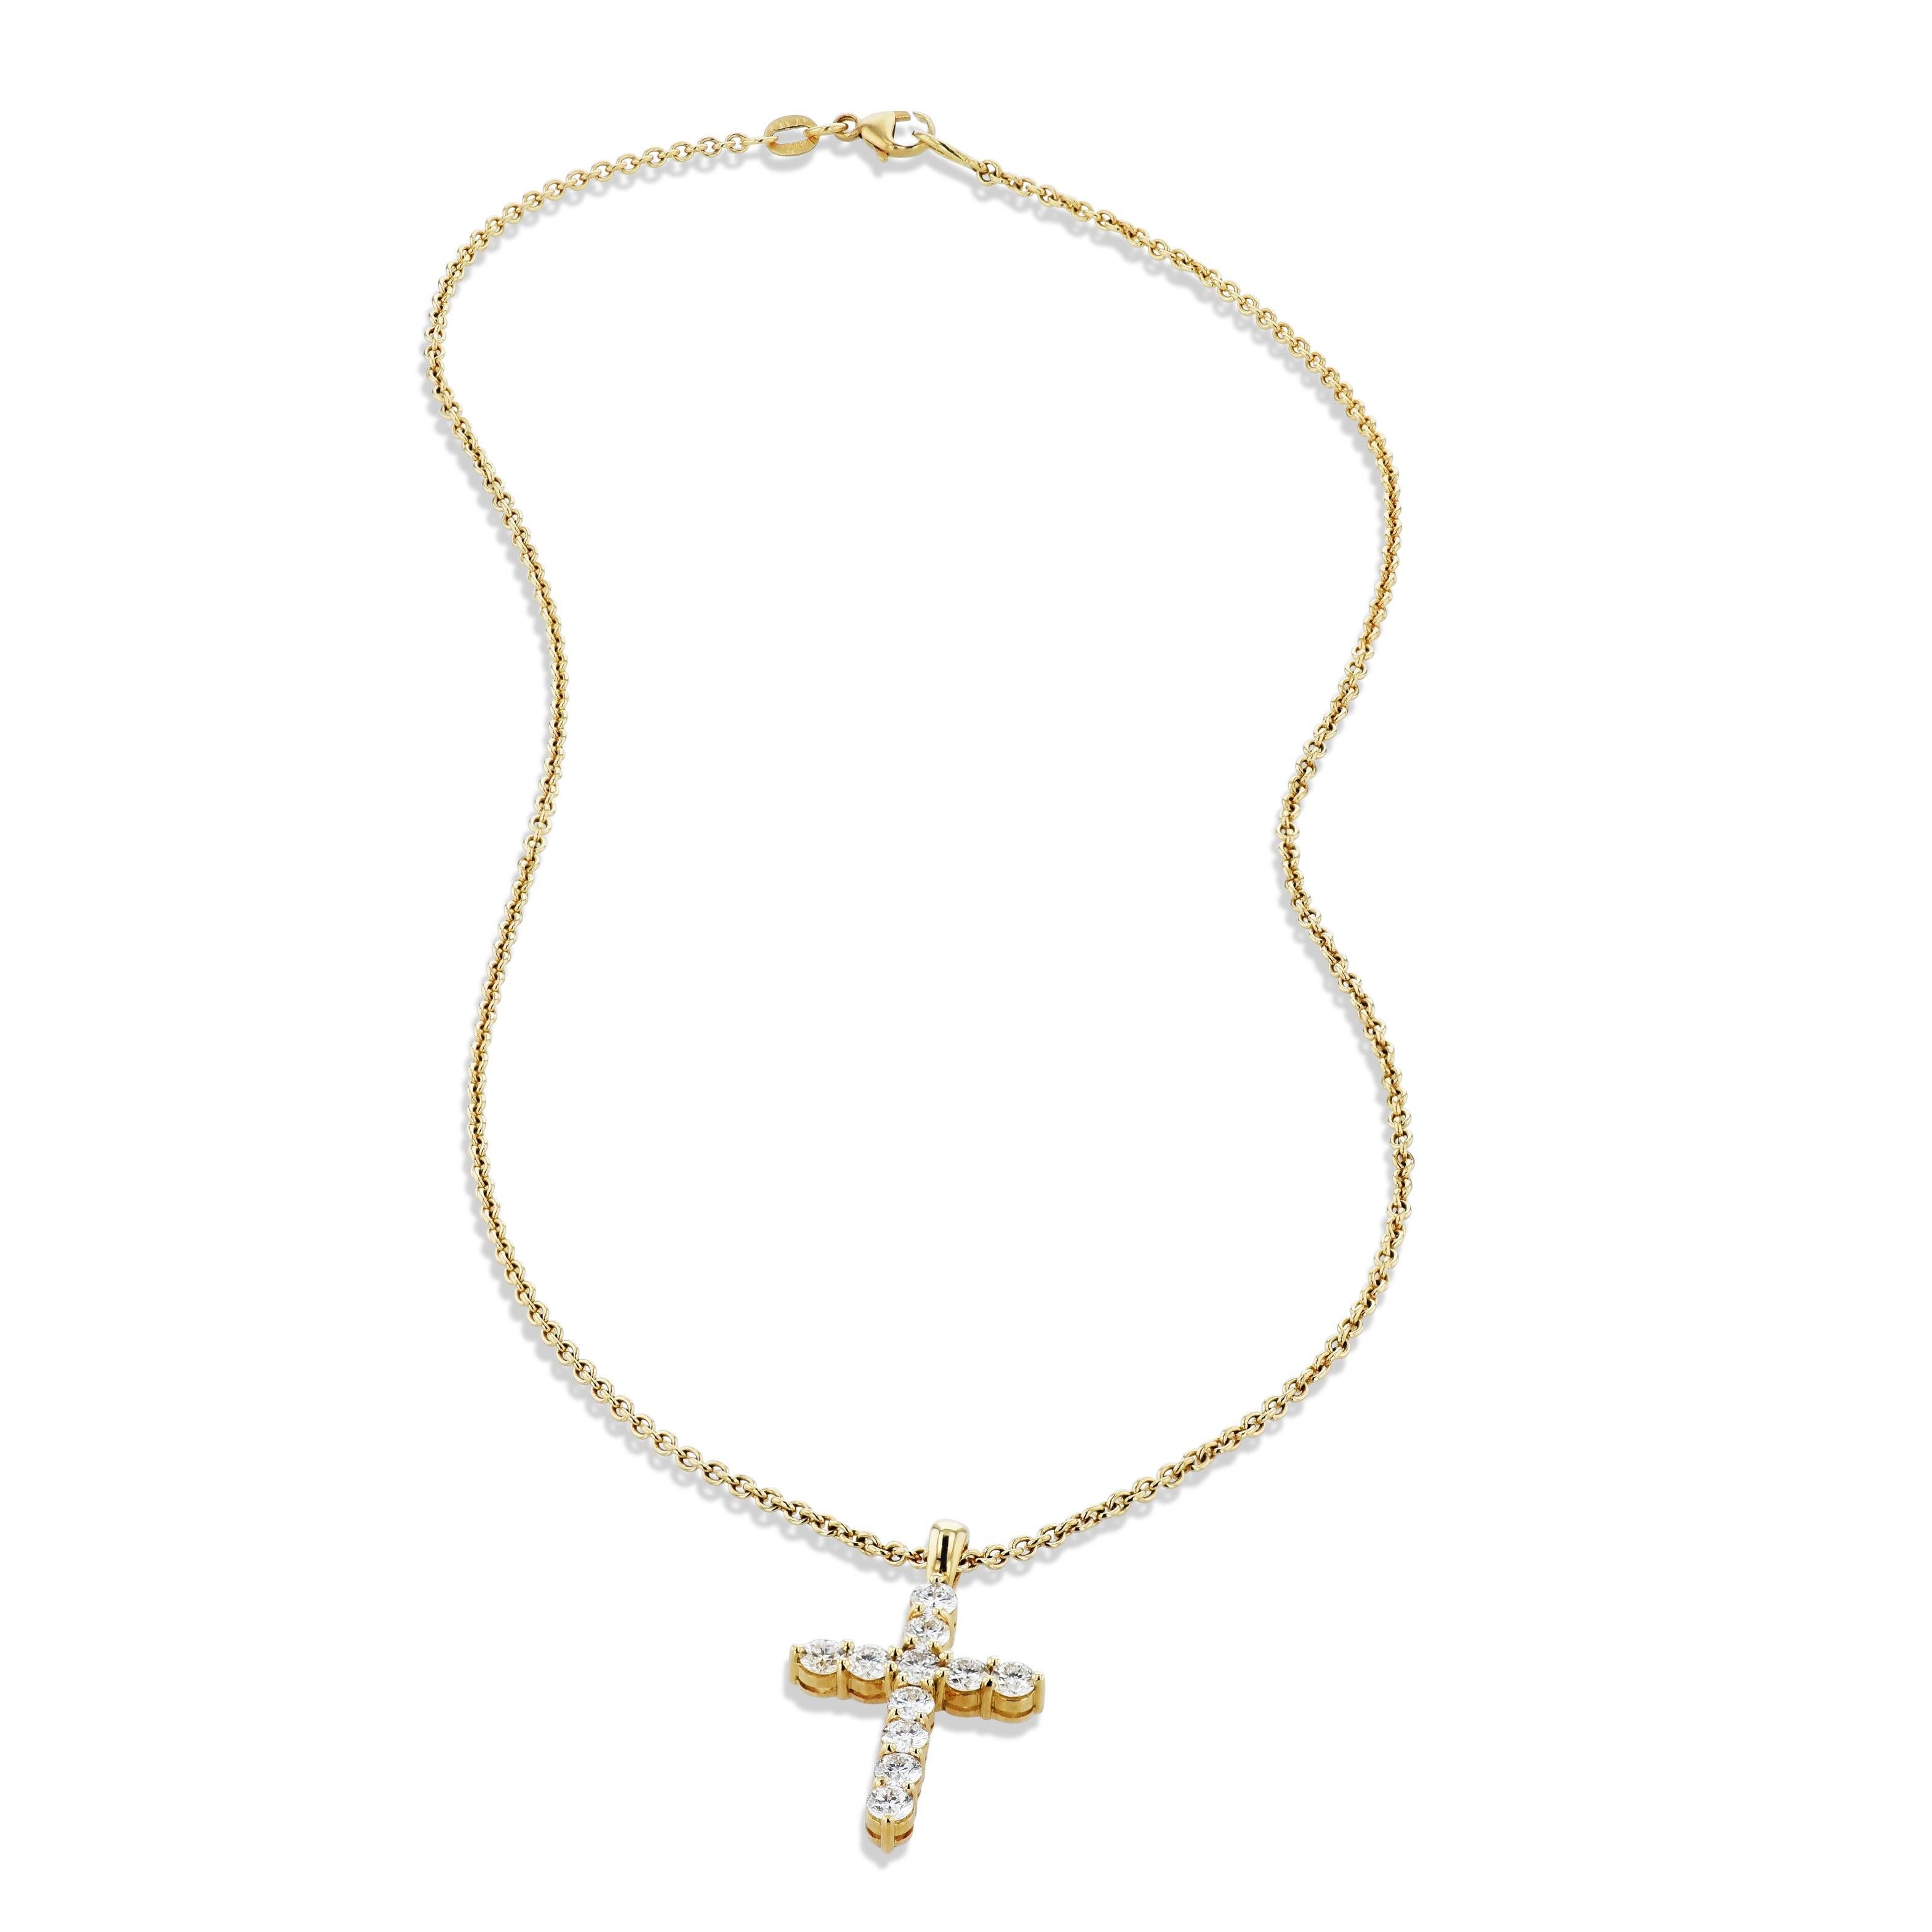 This exquisite Diamond Cross Pendant is handcrafted from 18 karat gold and glistens with diamonds.
This pendant is a 1.68 total carats. The diamonds are F/G in color and VS1 in clarity.
(Necklace not included).

The cross with the bale measures 1.25